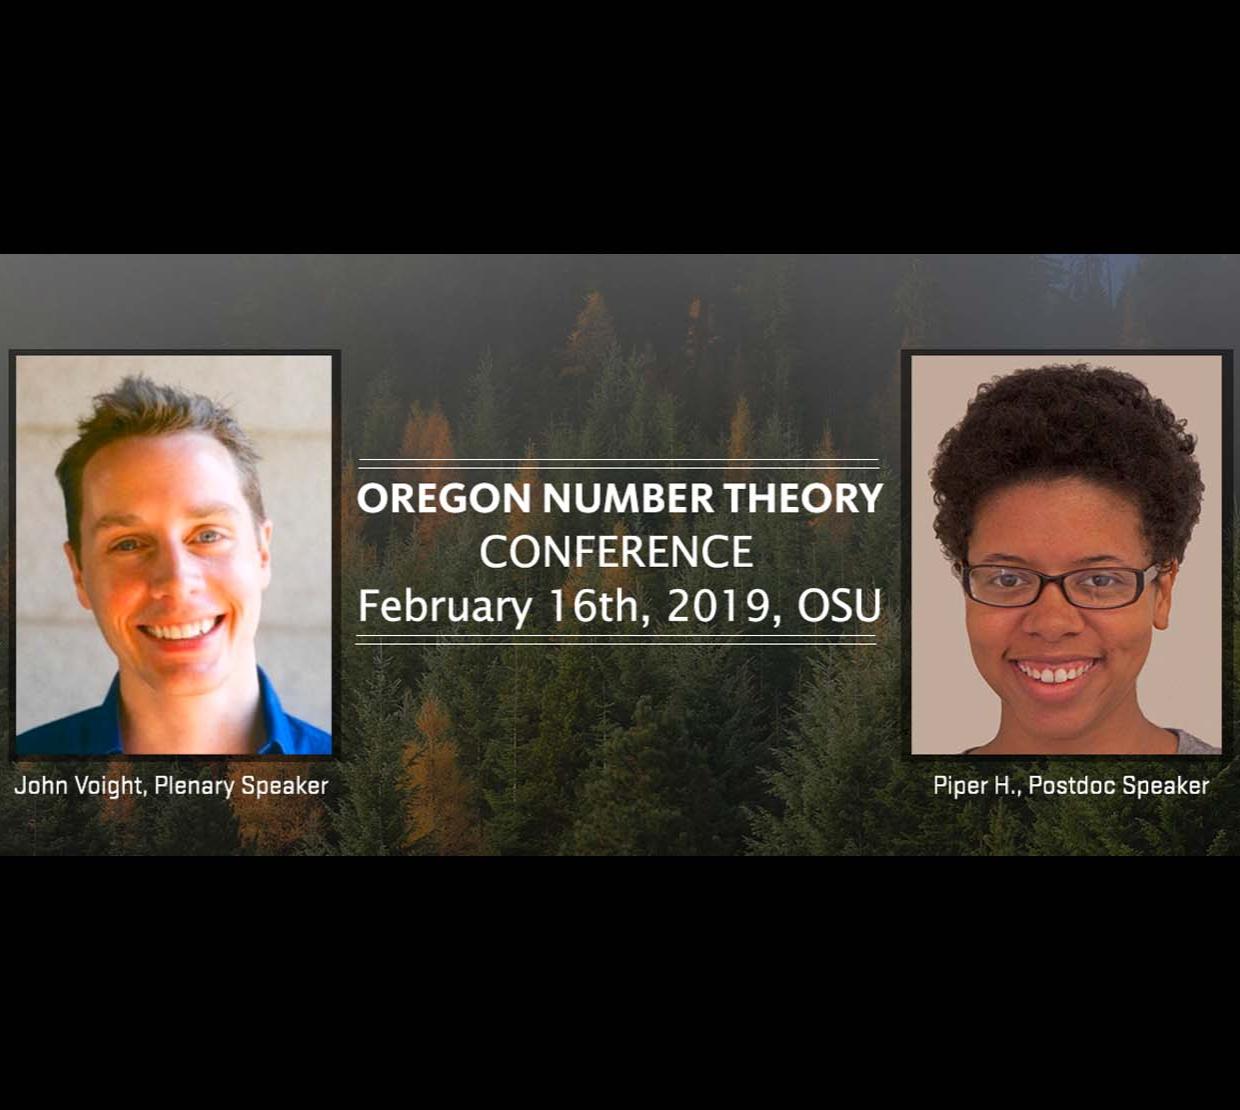 Text that reads "Oregon Number Theory Conference February 16th, 2019, OSU" overlayed on a photo of trees. There is a portrait image of John Voight with his name and the text "Plenary Speaker" underneath. There is another portrait photo of Piper H. with her name and the text "Postdoc Speaker" underneath.